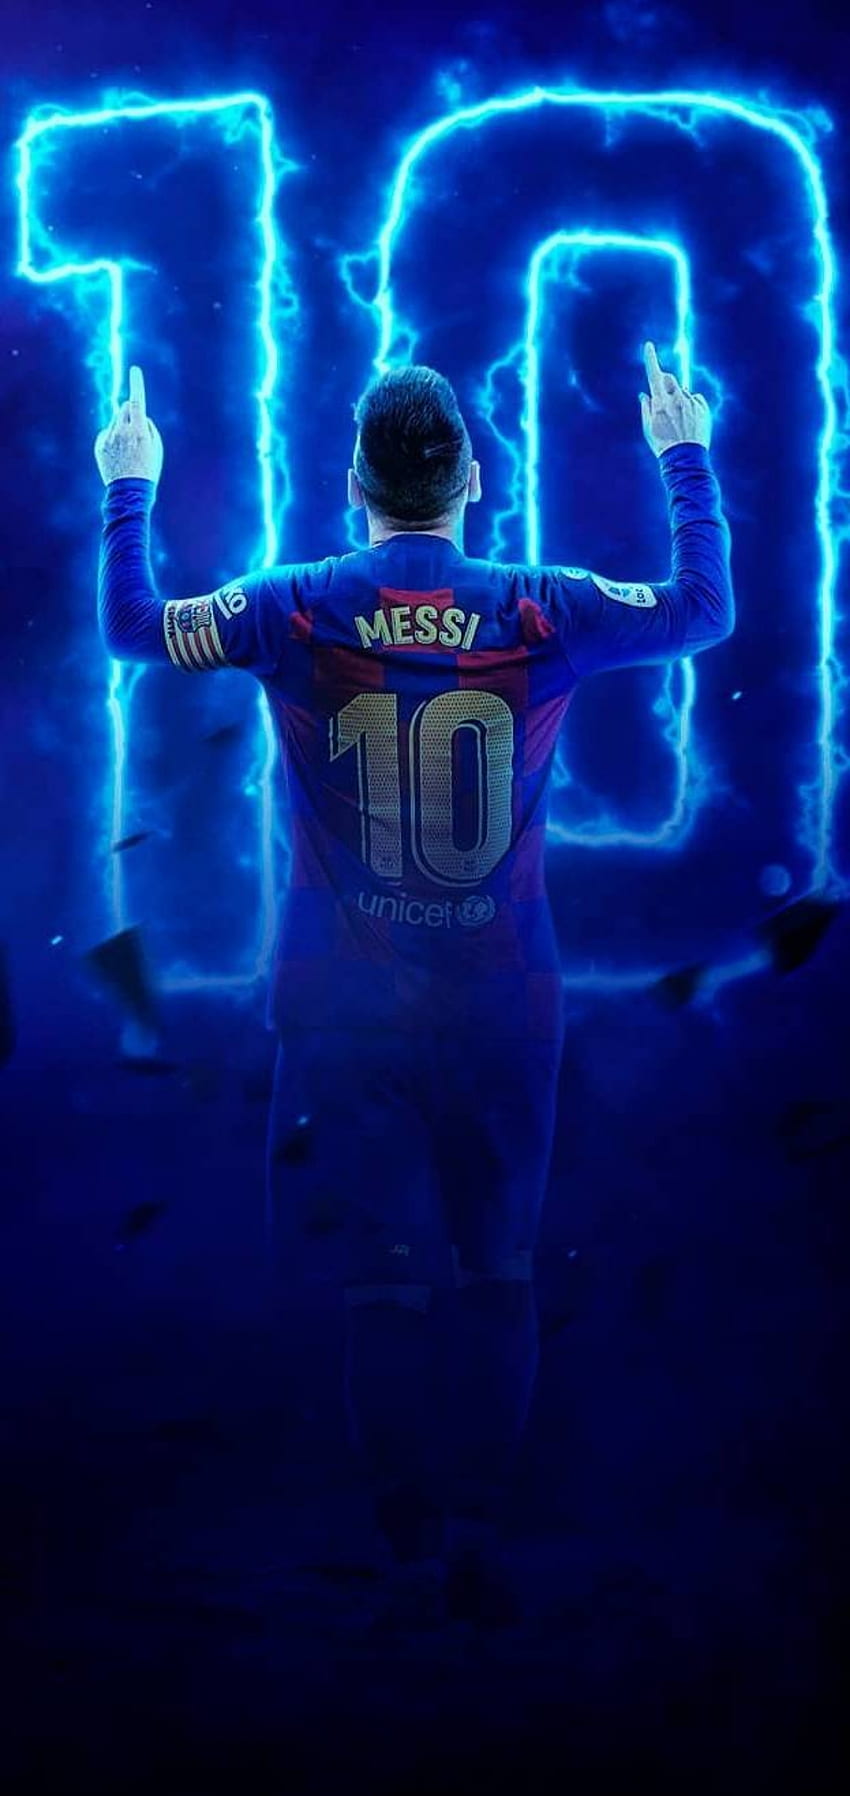 Messi Wallpapers  Top 30 Best Messi Wallpapers  HQ 